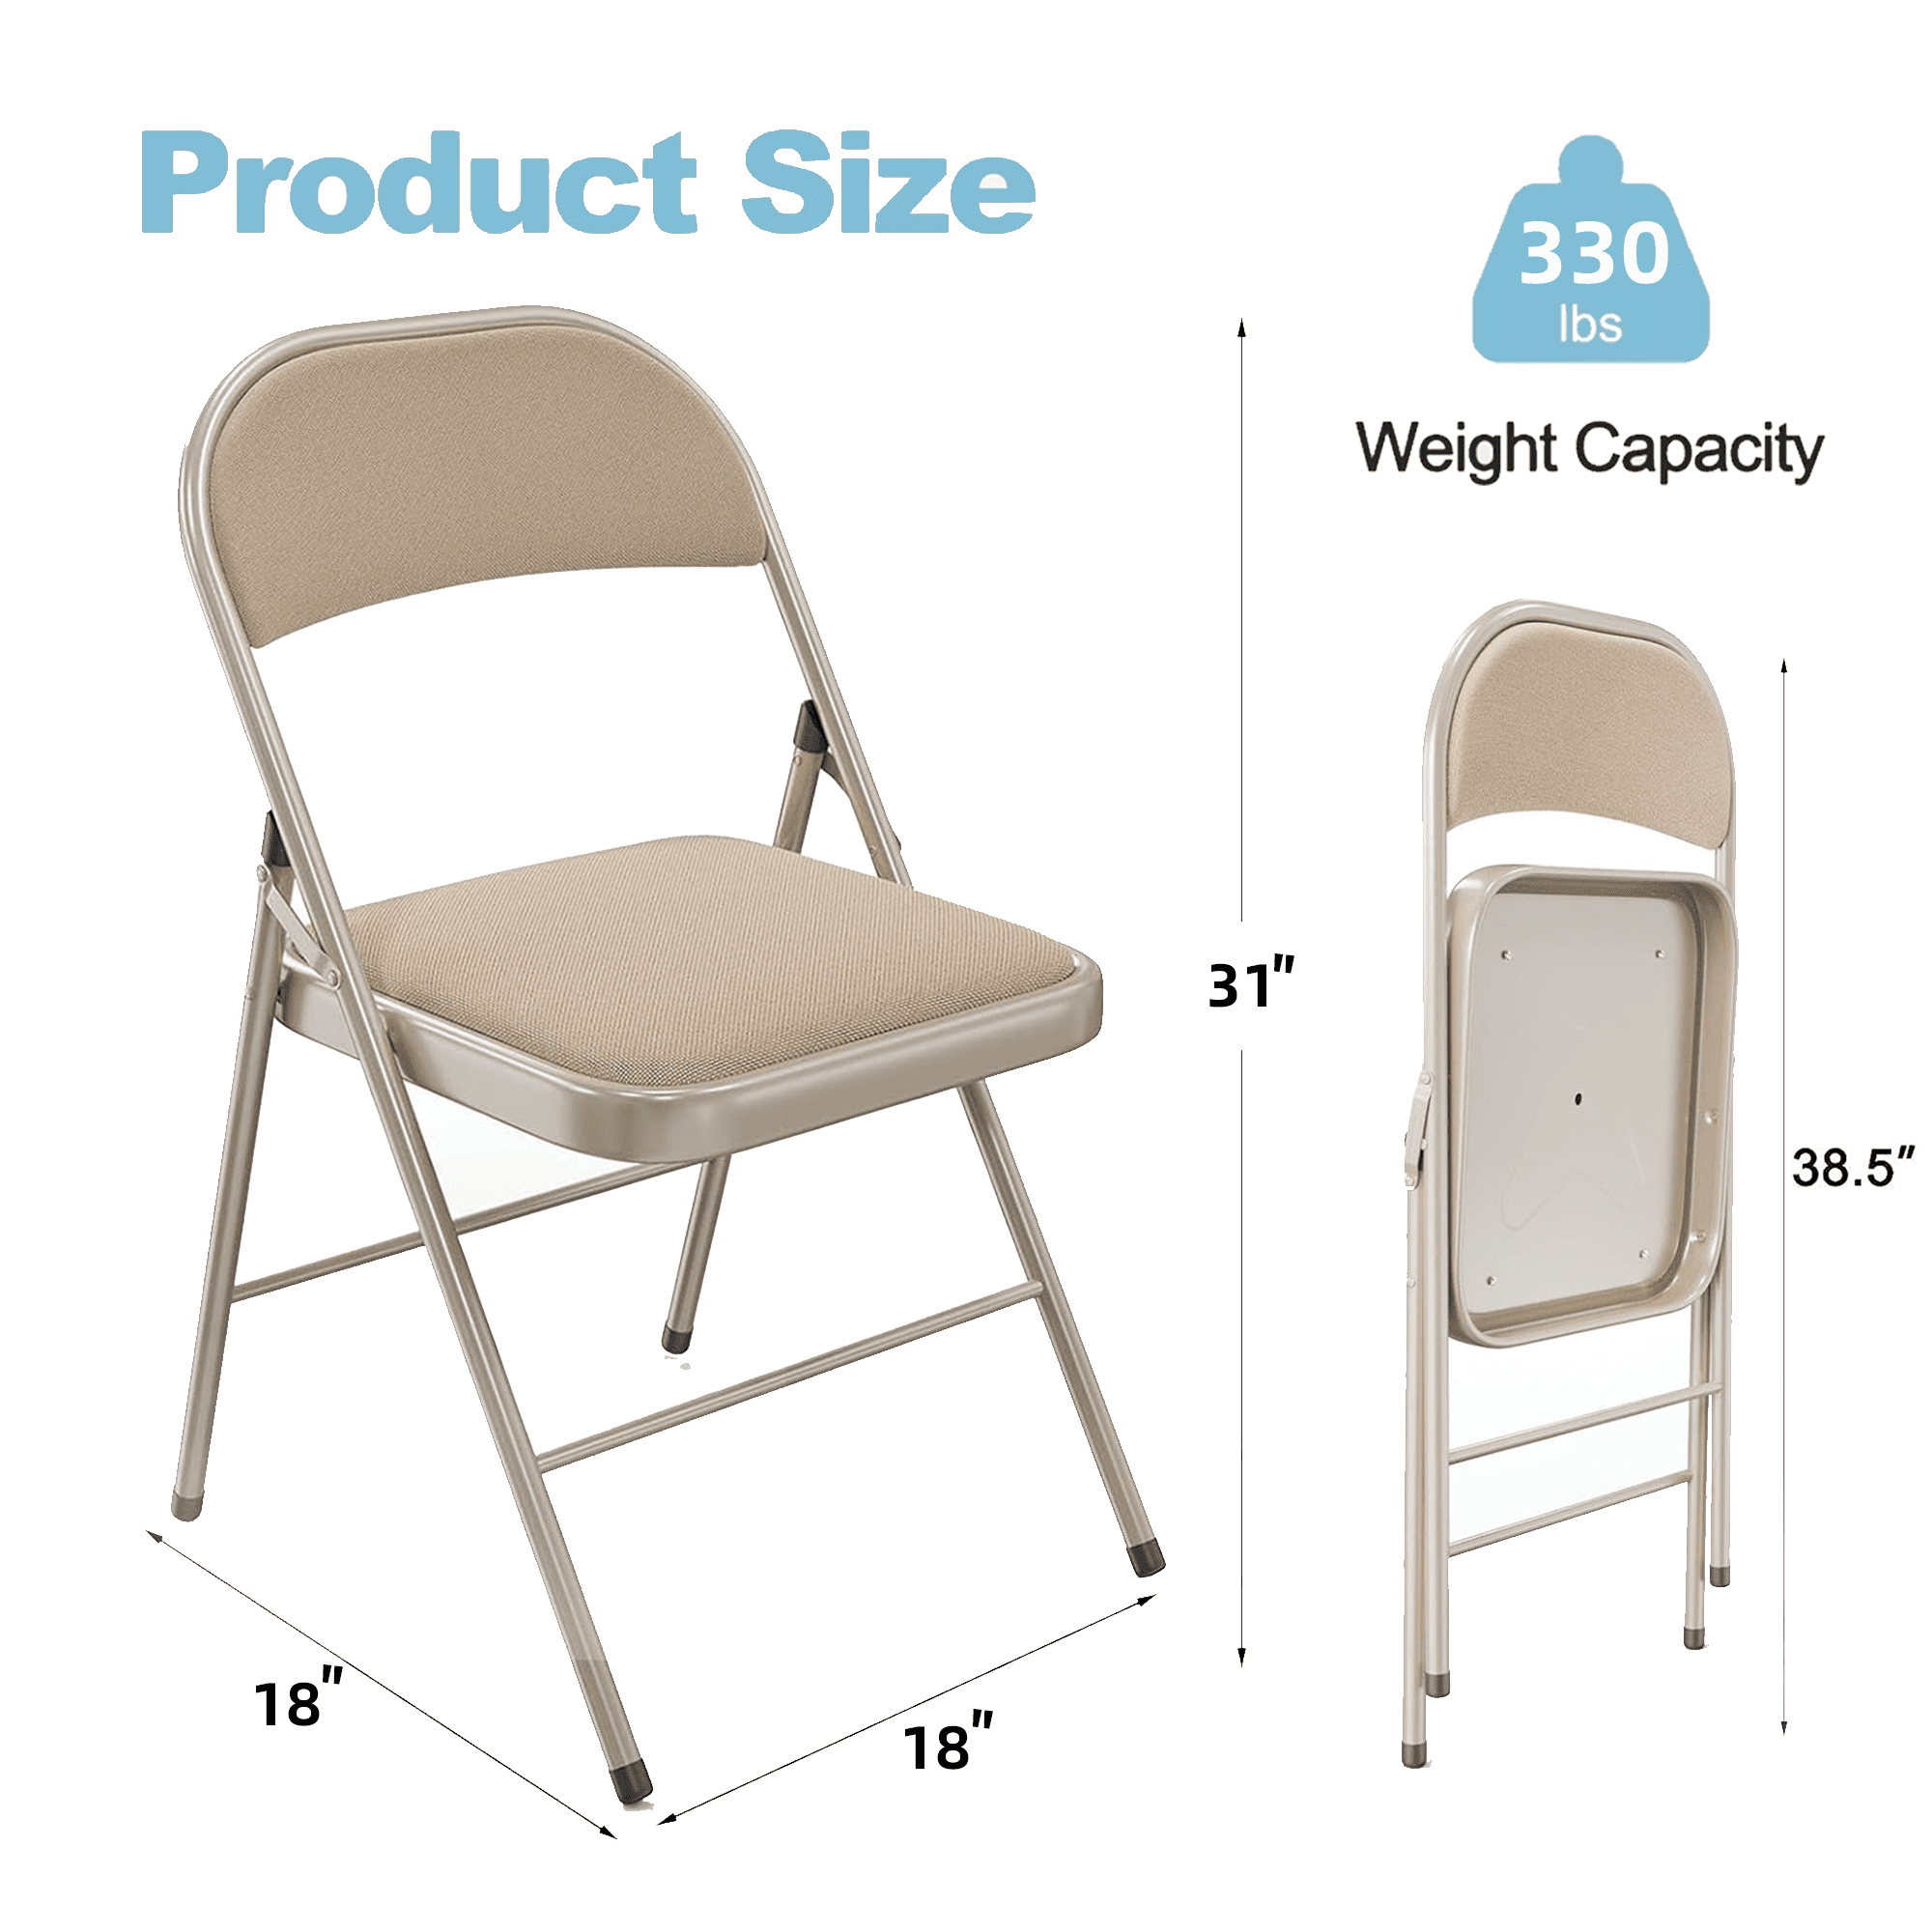 HONGGE 4 Pack Metal Padded Folding Chairs with Comfortable Cushion for Home and Office, for Indoor and Outdoor Events